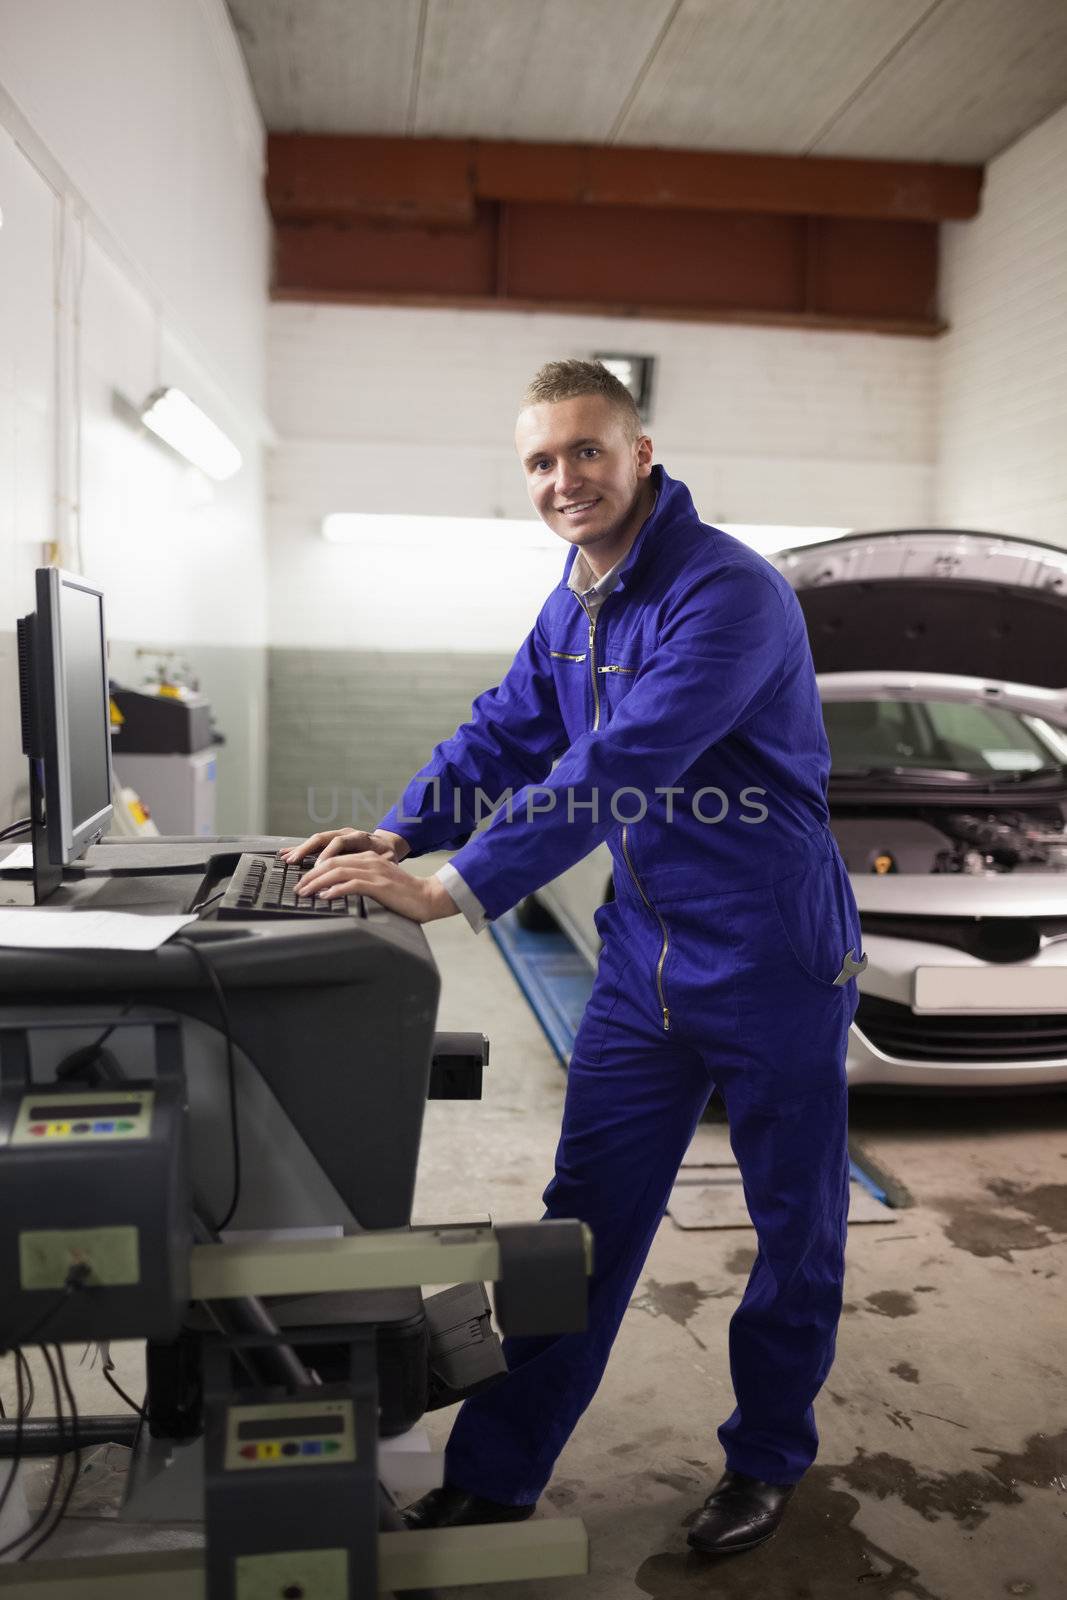 Mechanic using a computer while smiling in a garage